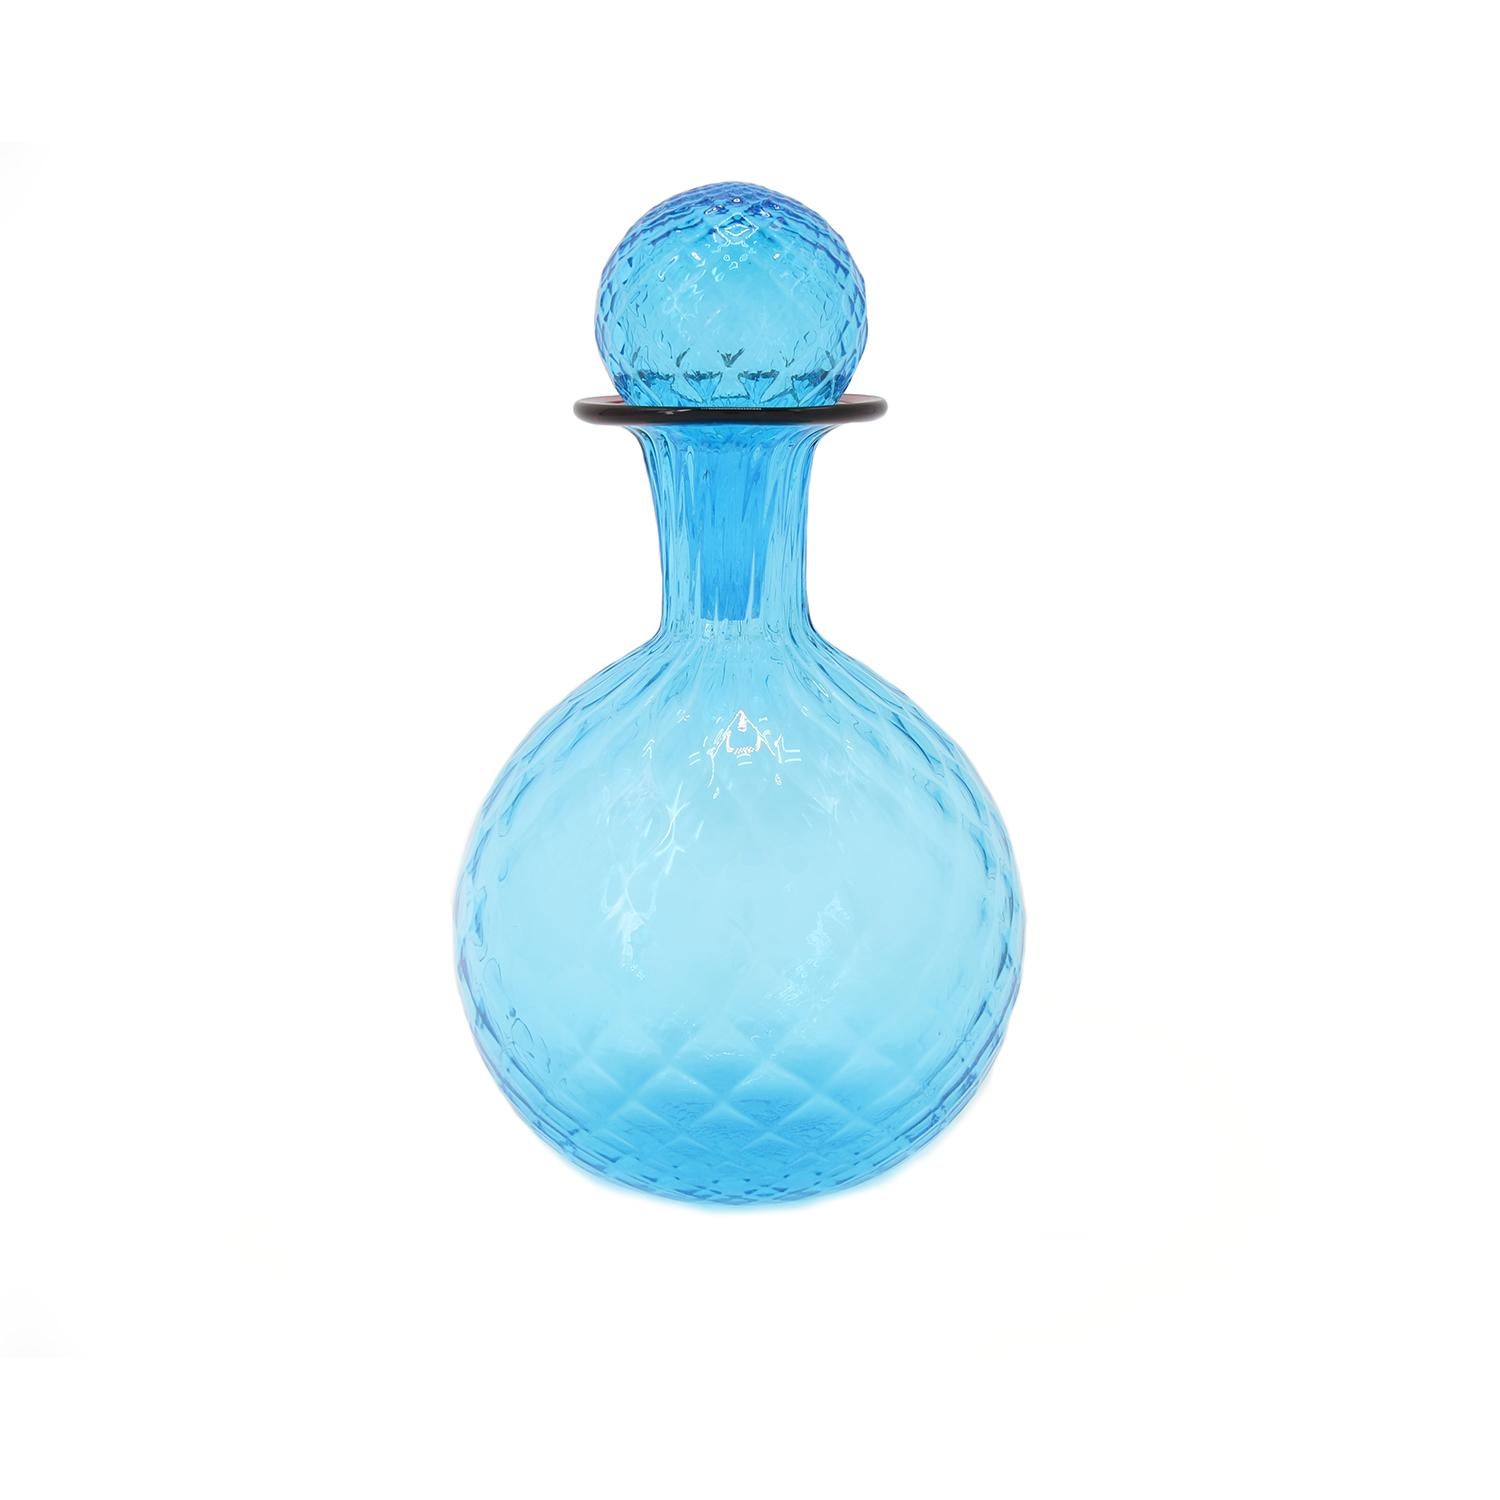 Hand-Crafted Murano Handmade Glass Balloton Decanter Bottle  For Sale